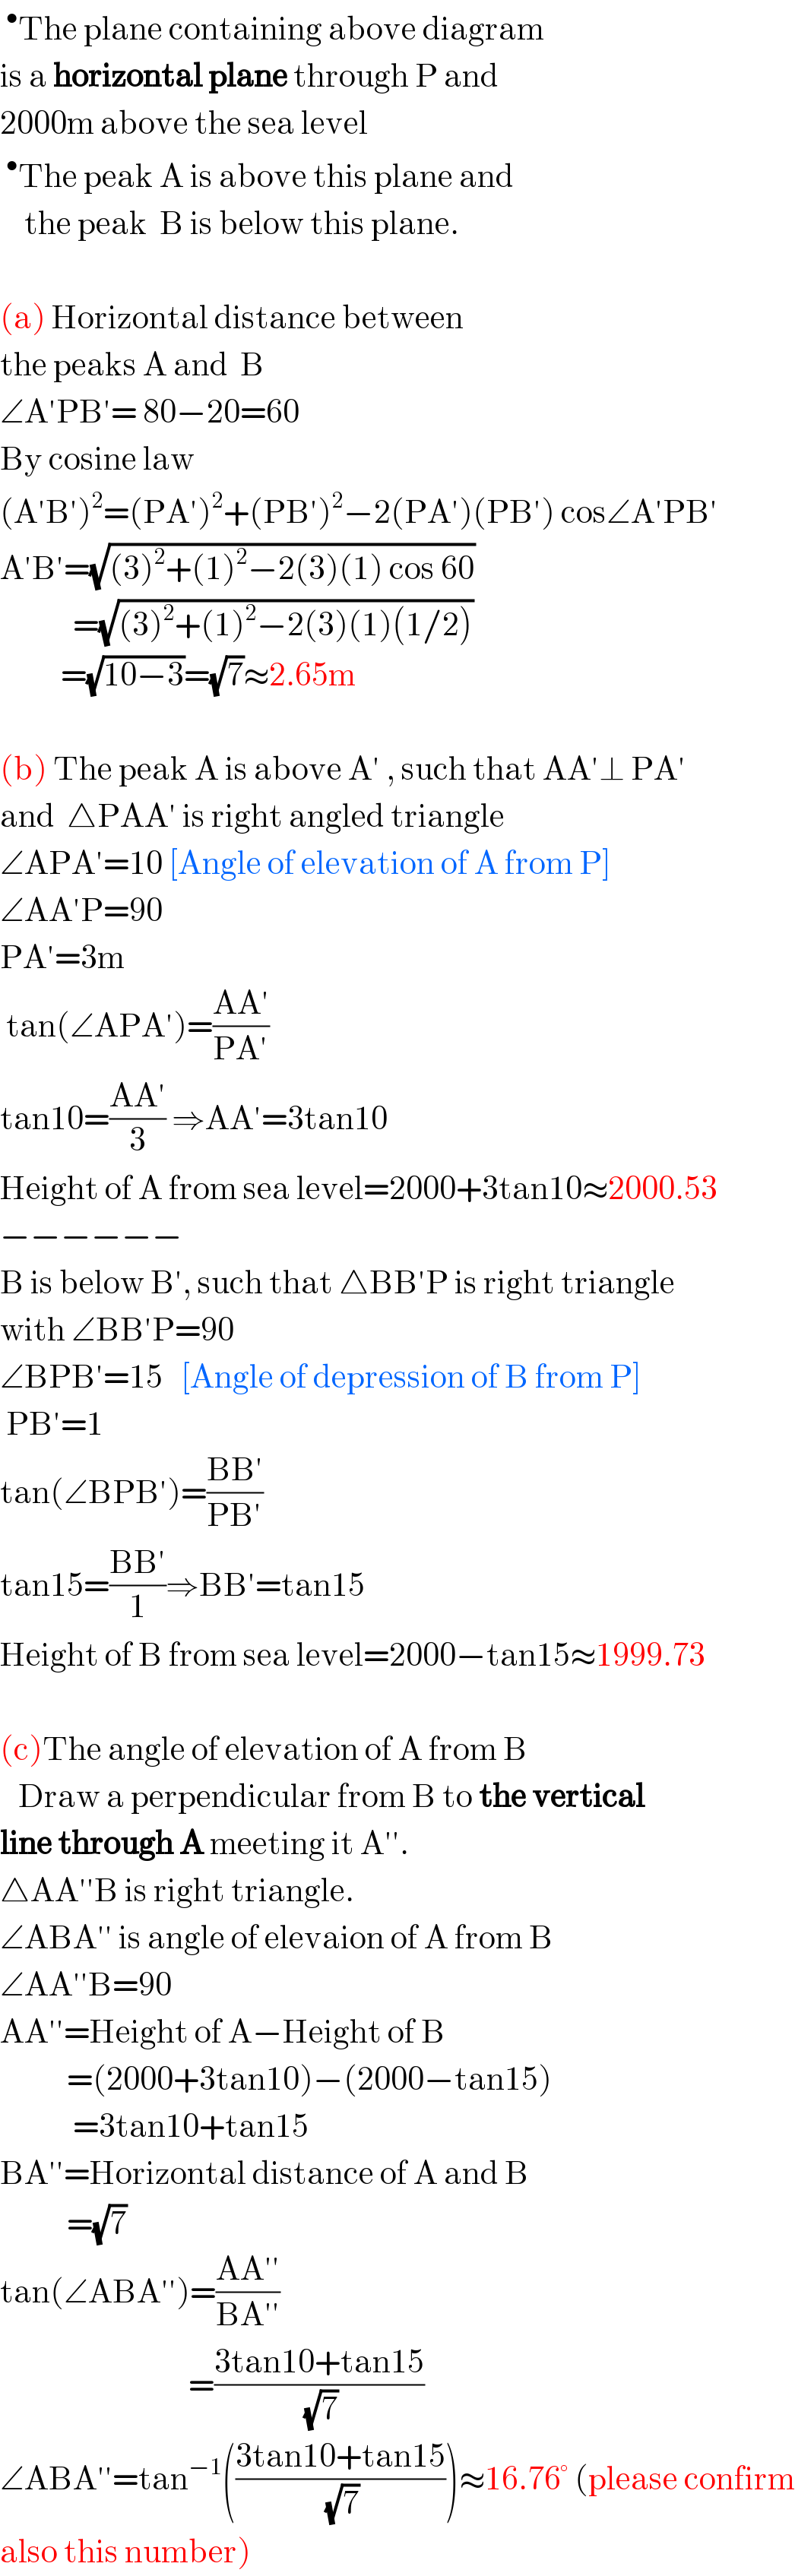 ^• The plane containing above diagram  is a horizontal plane through P and  2000m above the sea level  ^• The peak A is above this plane and      the peak  B is below this plane.    (a) Horizontal distance between  the peaks A and  B  ∠A′PB′= 80−20=60  By cosine law  (A′B′)^2 =(PA′)^2 +(PB′)^2 −2(PA′)(PB′) cos∠A′PB′   A′B′=(√((3)^2 +(1)^2 −2(3)(1) cos 60))              =(√((3)^2 +(1)^2 −2(3)(1)(1/2)))            =(√(10−3))=(√7)≈2.65m    (b) The peak A is above A′ , such that AA′⊥ PA′  and  △PAA′ is right angled triangle  ∠APA′=10 [Angle of elevation of A from P]  ∠AA′P=90  PA′=3m   tan(∠APA′)=((AA′)/(PA′))   tan10=((AA′)/3) ⇒AA′=3tan10  Height of A from sea level=2000+3tan10≈2000.53  −−−−−−  B is below B′, such that △BB′P is right triangle  with ∠BB′P=90  ∠BPB′=15   [Angle of depression of B from P]   PB′=1   tan(∠BPB′)=((BB′)/(PB′))   tan15=((BB′)/1)⇒BB′=tan15   Height of B from sea level=2000−tan15≈1999.73    (c)The angle of elevation of A from B     Draw a perpendicular from B to the vertical  line through A meeting it A′′.  △AA′′B is right triangle.  ∠ABA′′ is angle of elevaion of A from B  ∠AA′′B=90  AA′′=Height of A−Height of B             =(2000+3tan10)−(2000−tan15)              =3tan10+tan15  BA′′=Horizontal distance of A and B             =(√7)  tan(∠ABA′′)=((AA′′)/(BA′′))                                 =((3tan10+tan15)/(√7))  ∠ABA′′=tan^(−1) (((3tan10+tan15)/(√7)))≈16.76° (please confirm  also this number)  